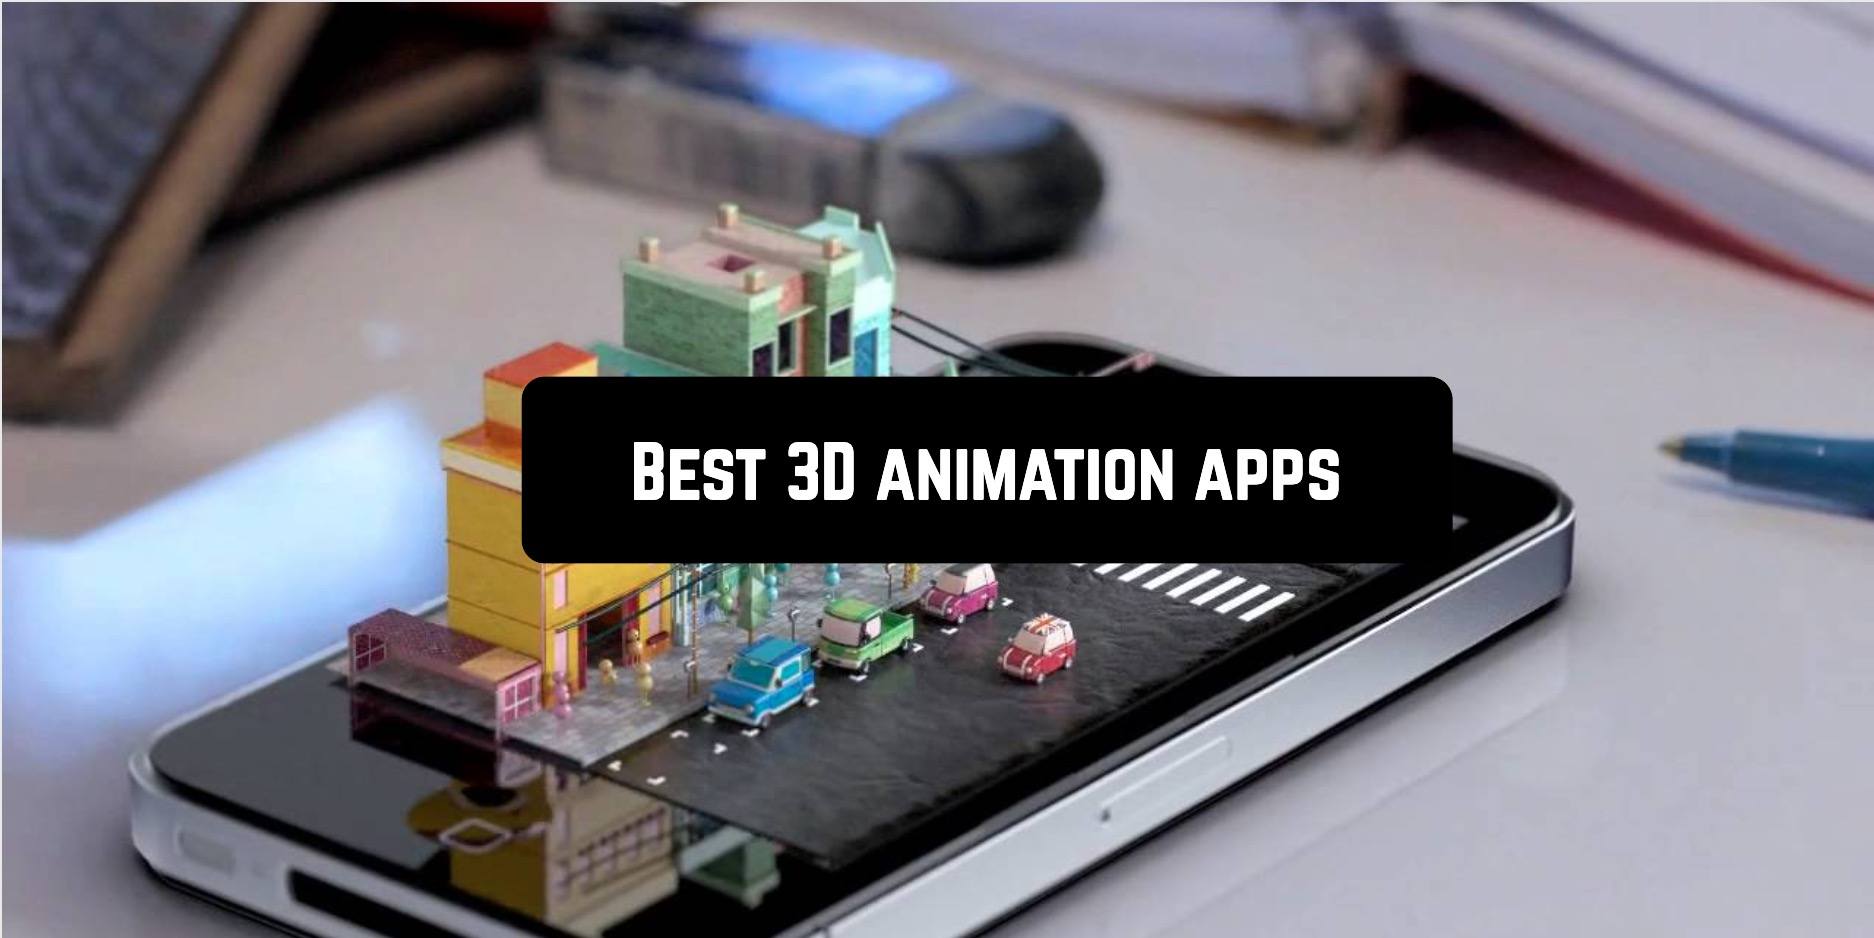 Best 3D animation apps